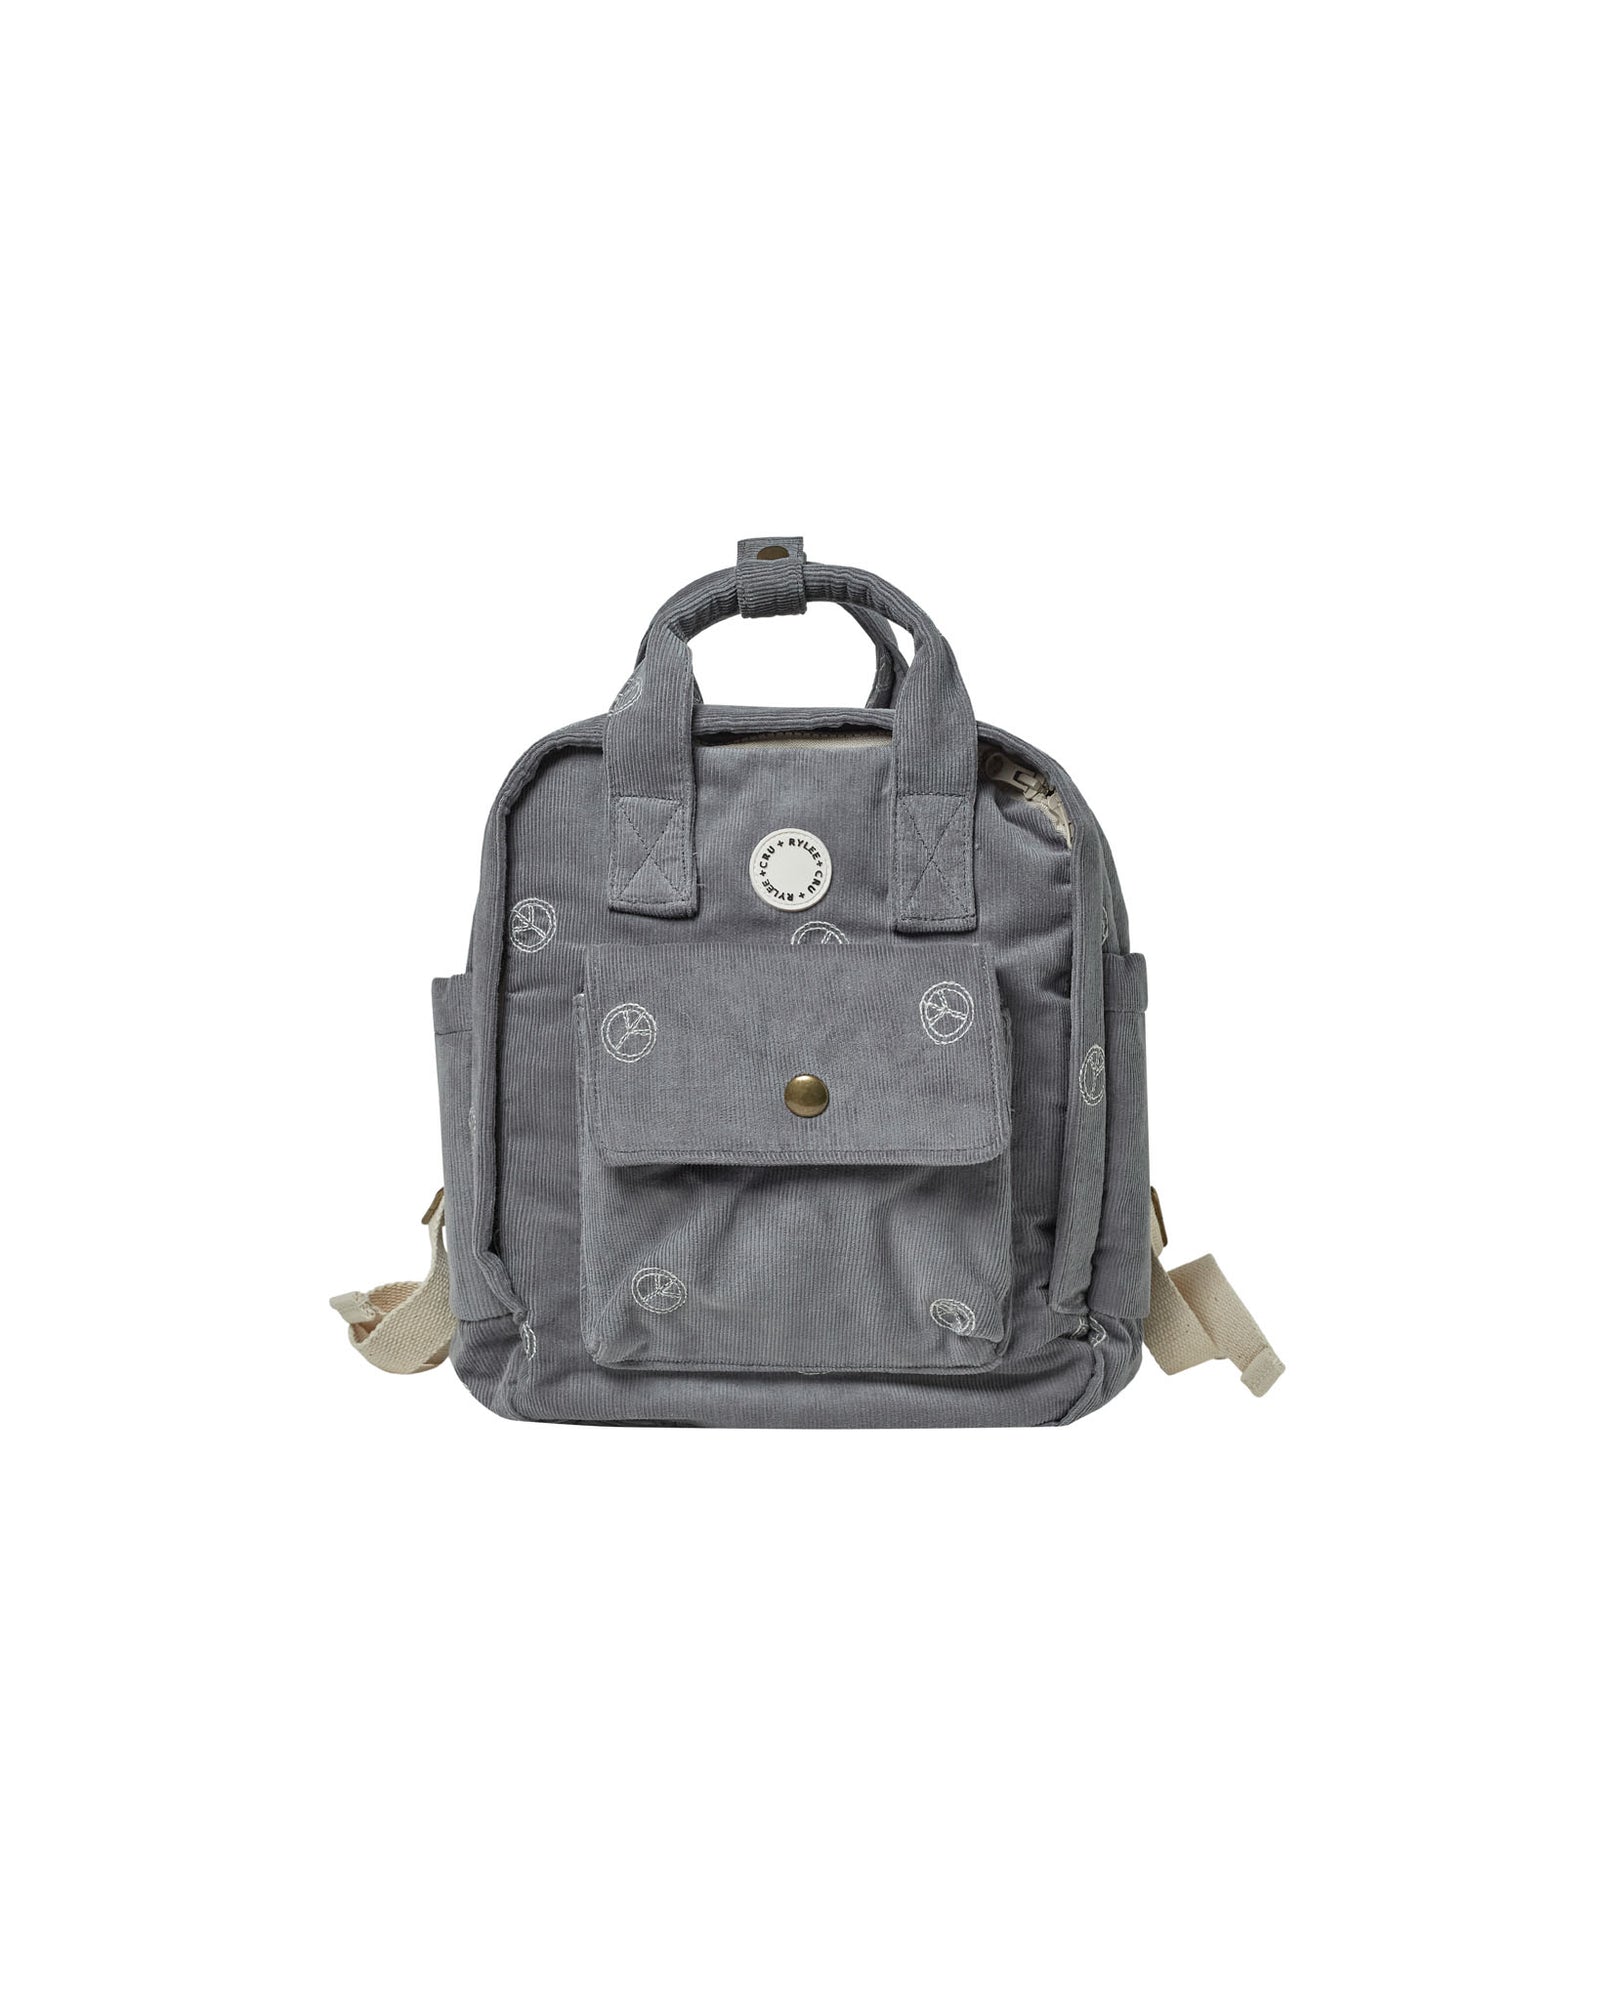 KONGES STORM QUILTED BACKPACK / SMOKE GREY - Milk + Bots